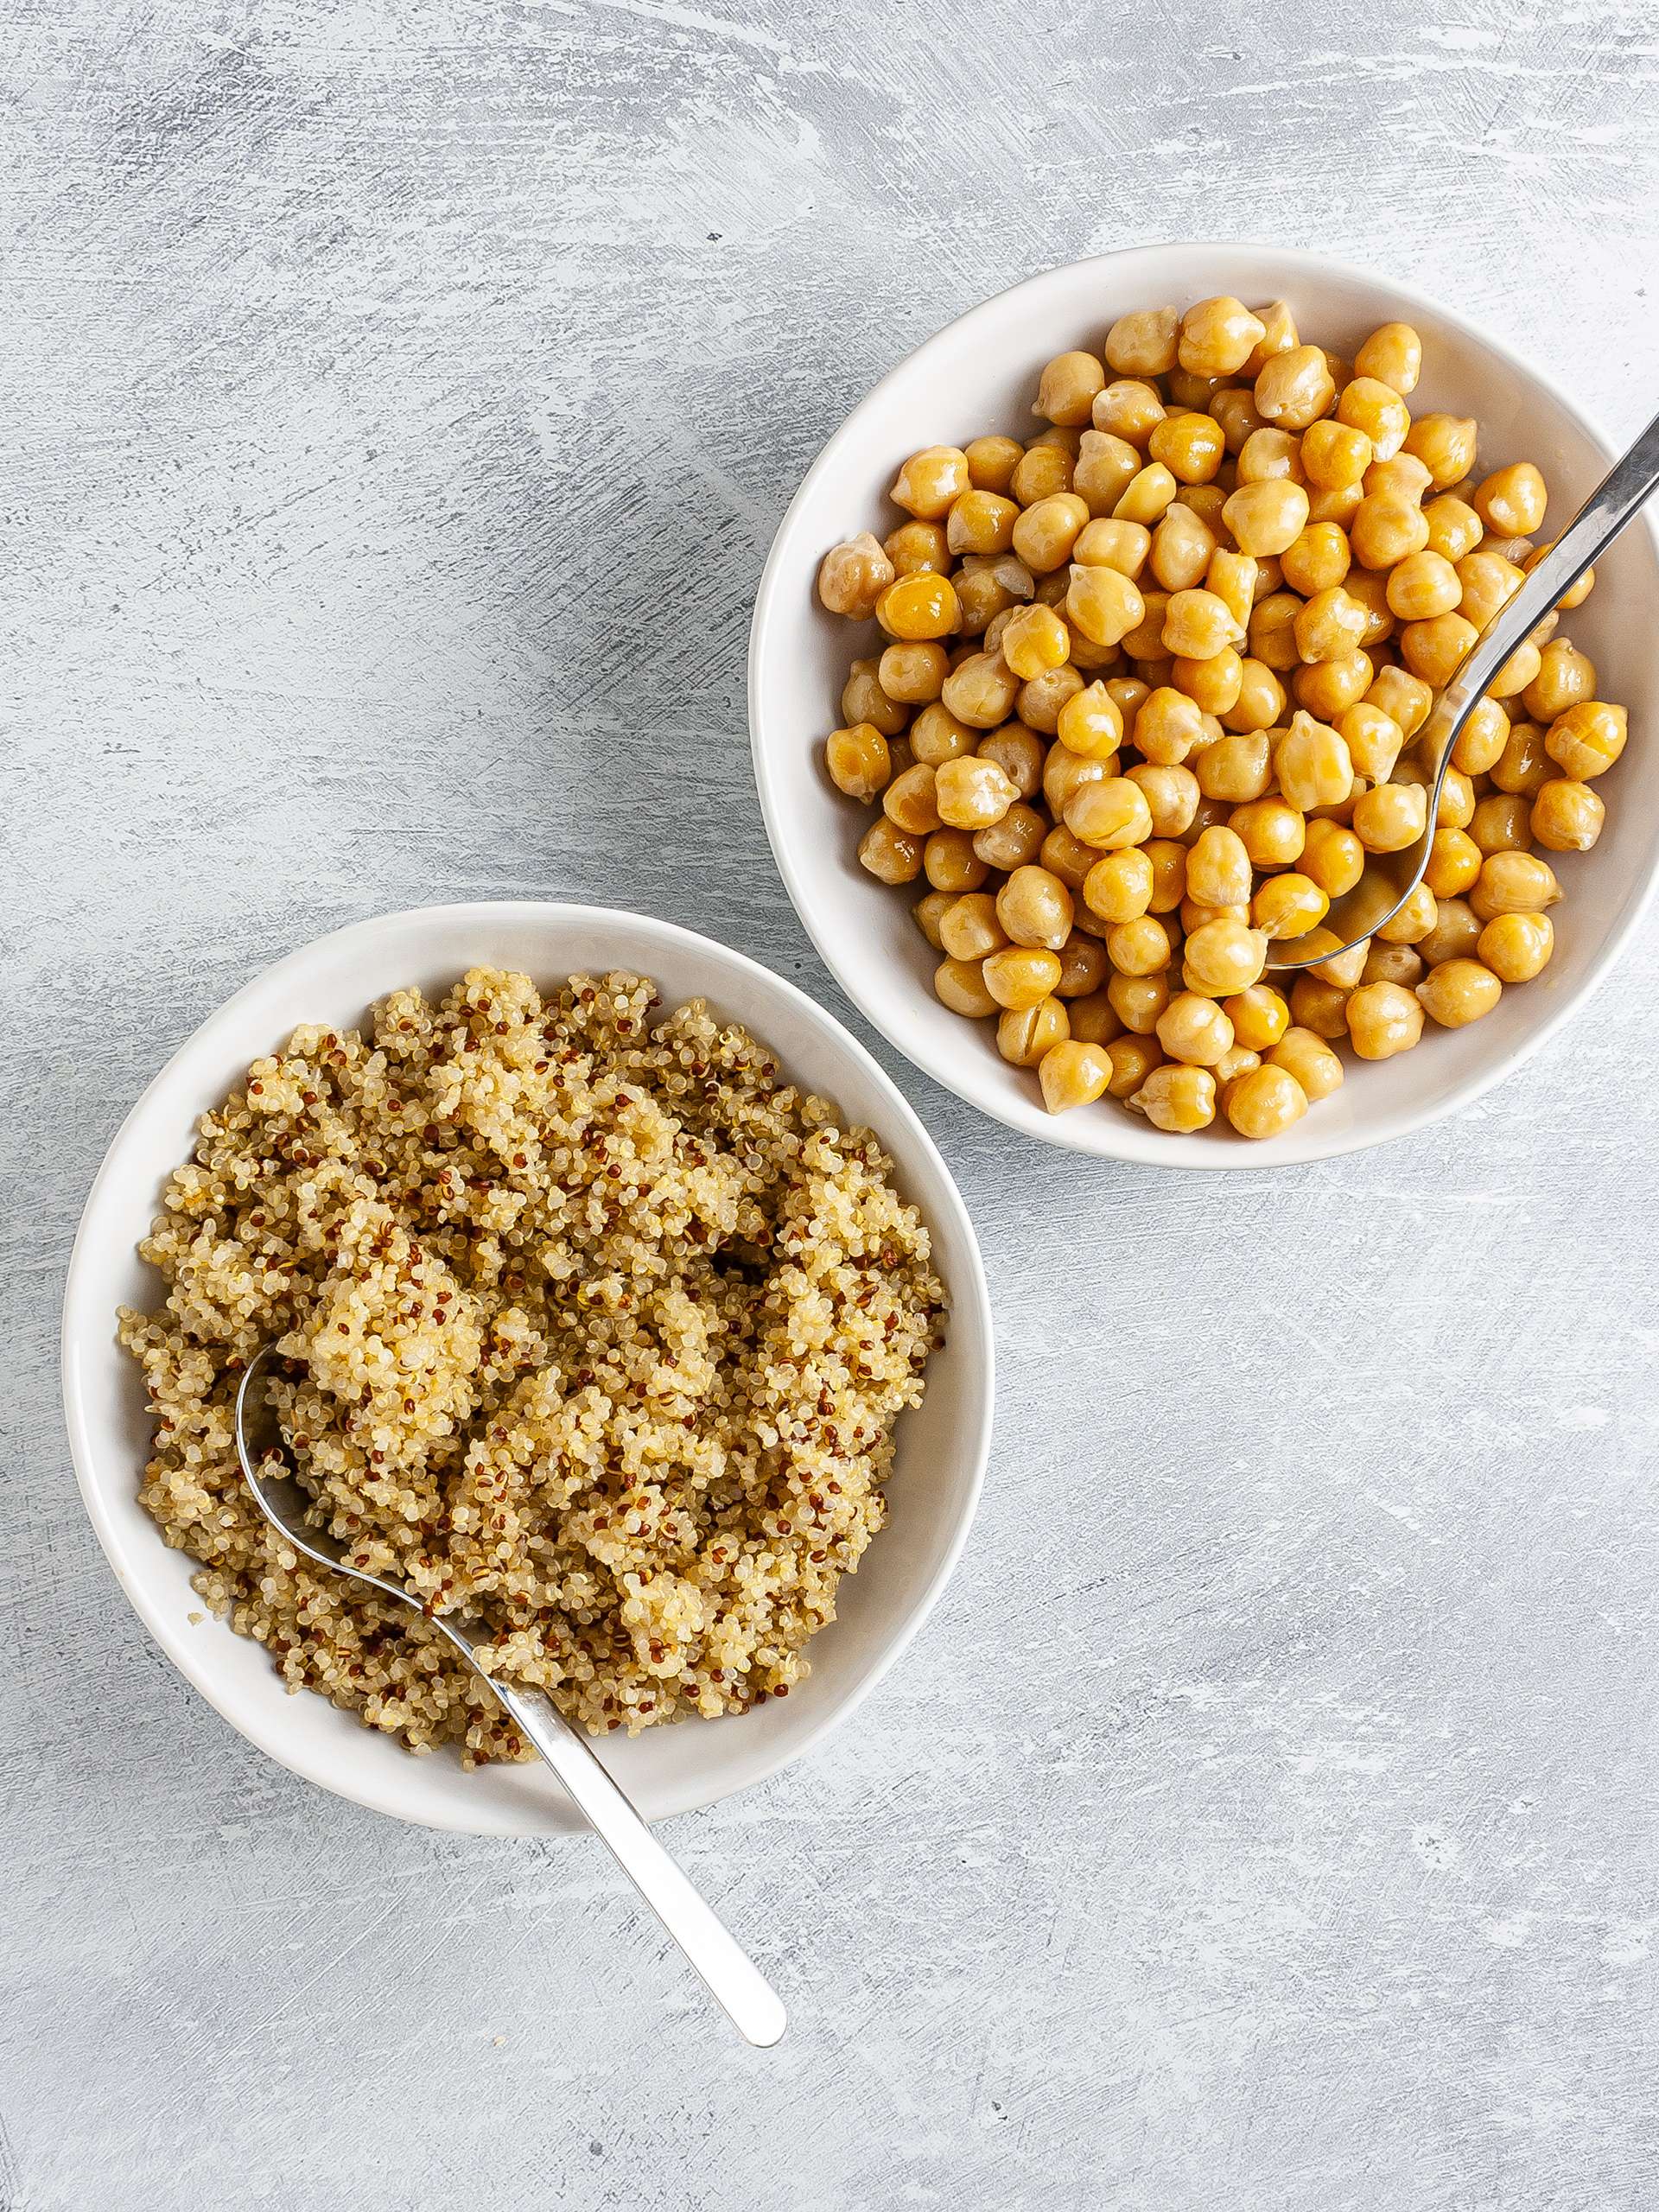 Cooked quinoa and chickpeas